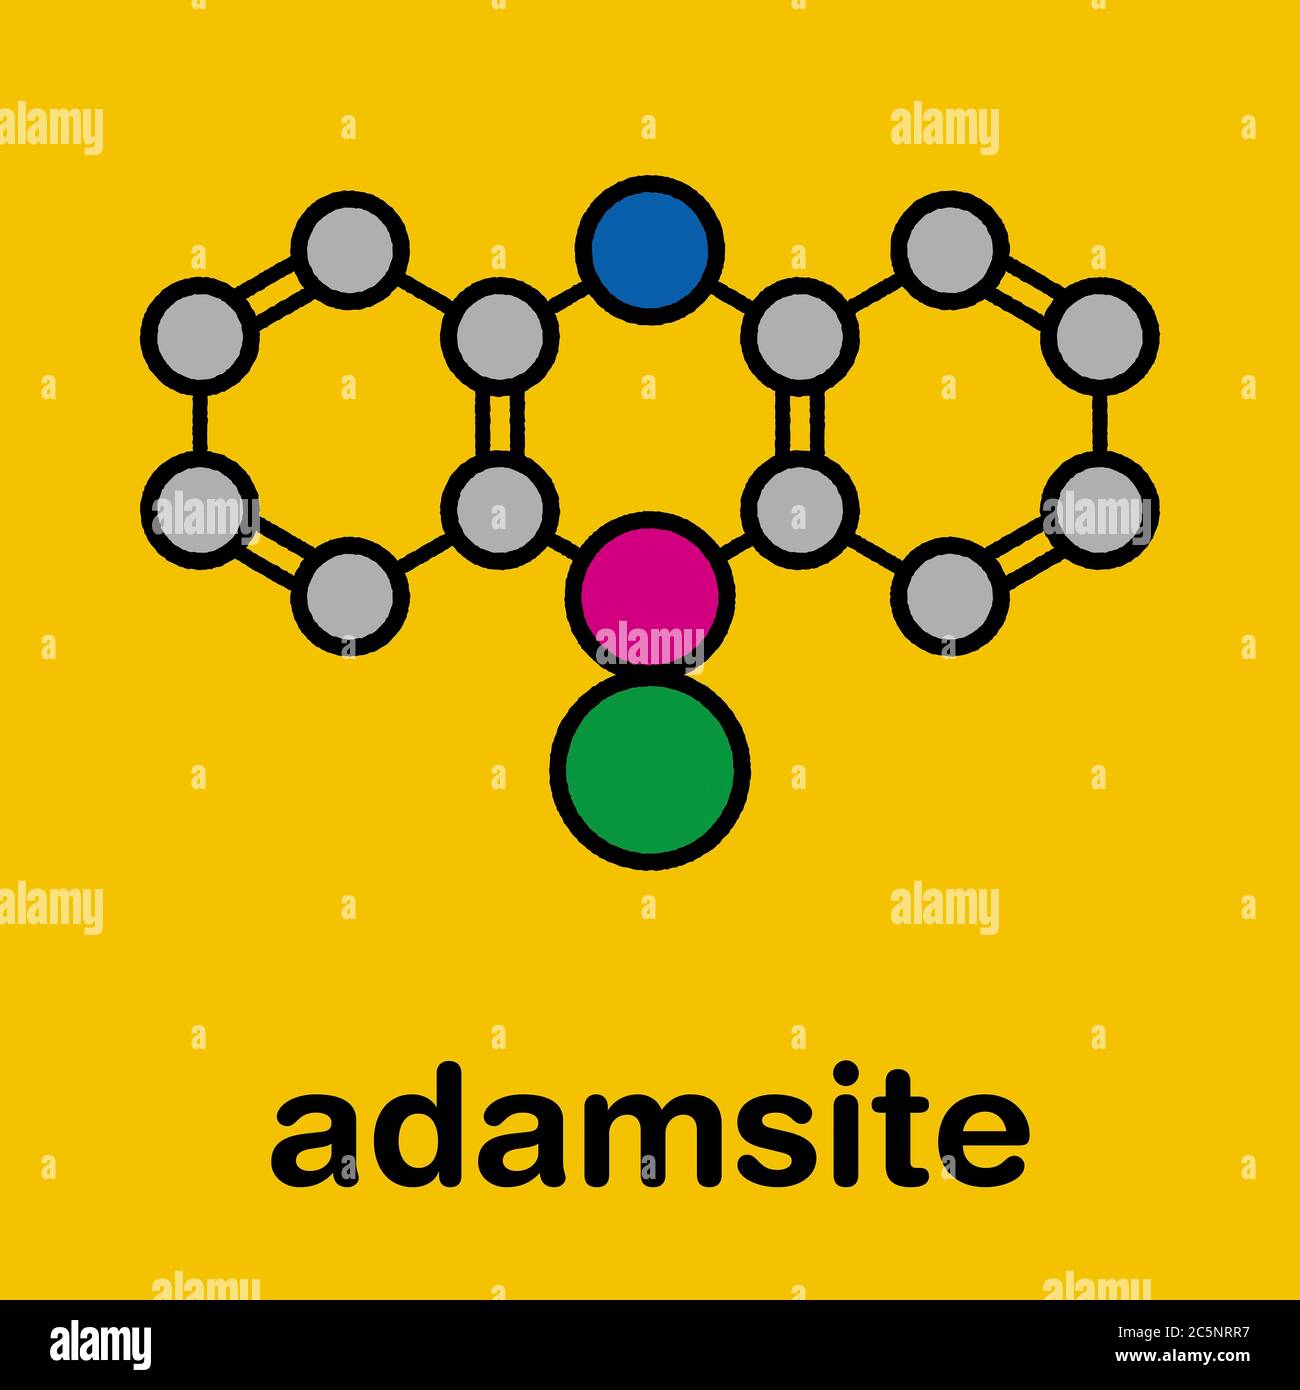 Adamsite or DM riot control agent. Stylized skeletal formula (chemical structure): Atoms are shown as color-coded circles: hydrogen (hidden), carbon (grey), nitrogen (blue), chlorine (green), arsenic (magenta). Stock Photo